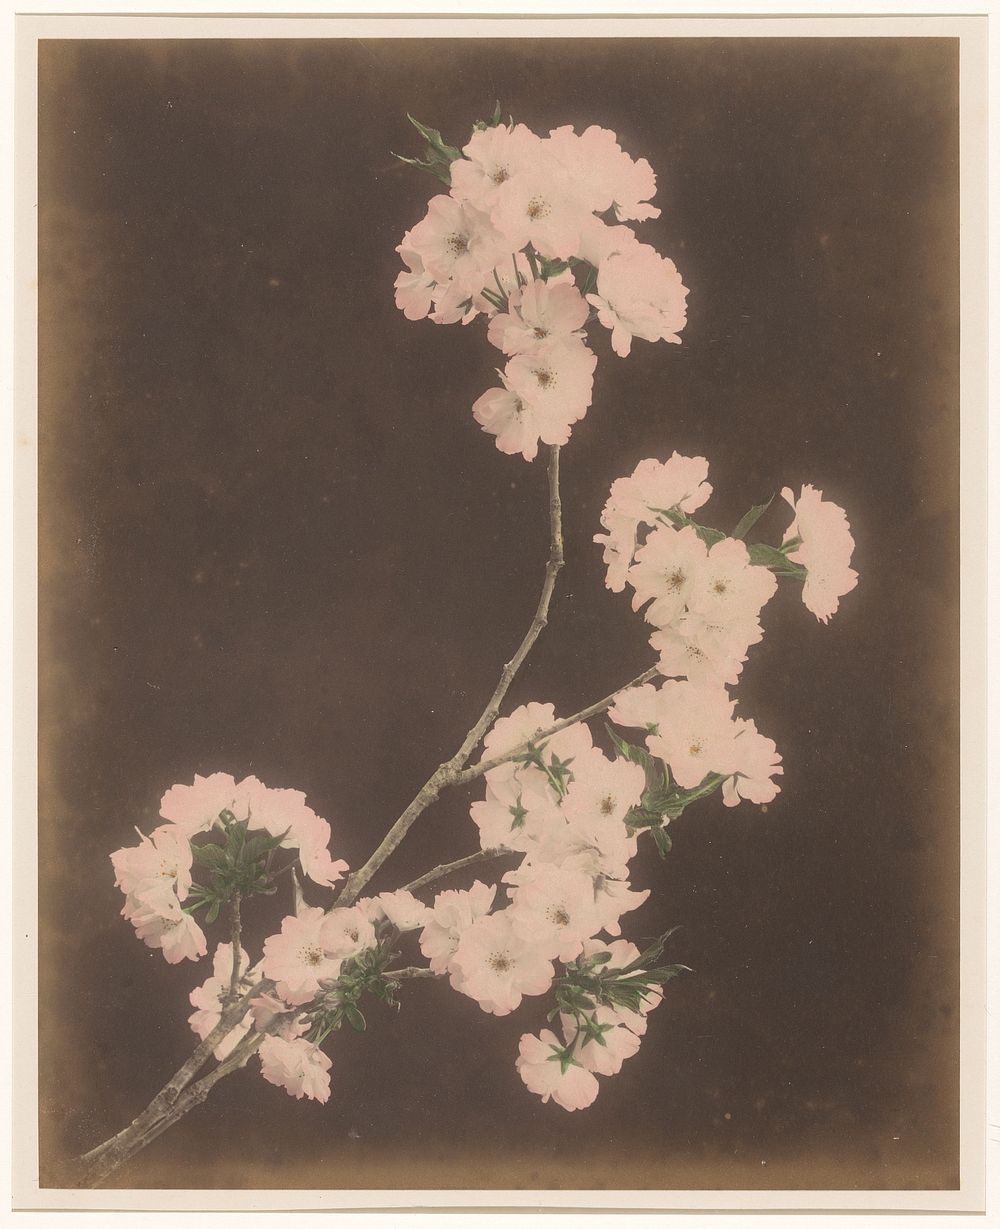 Witte lelies (1855 - 1890) by anonymous